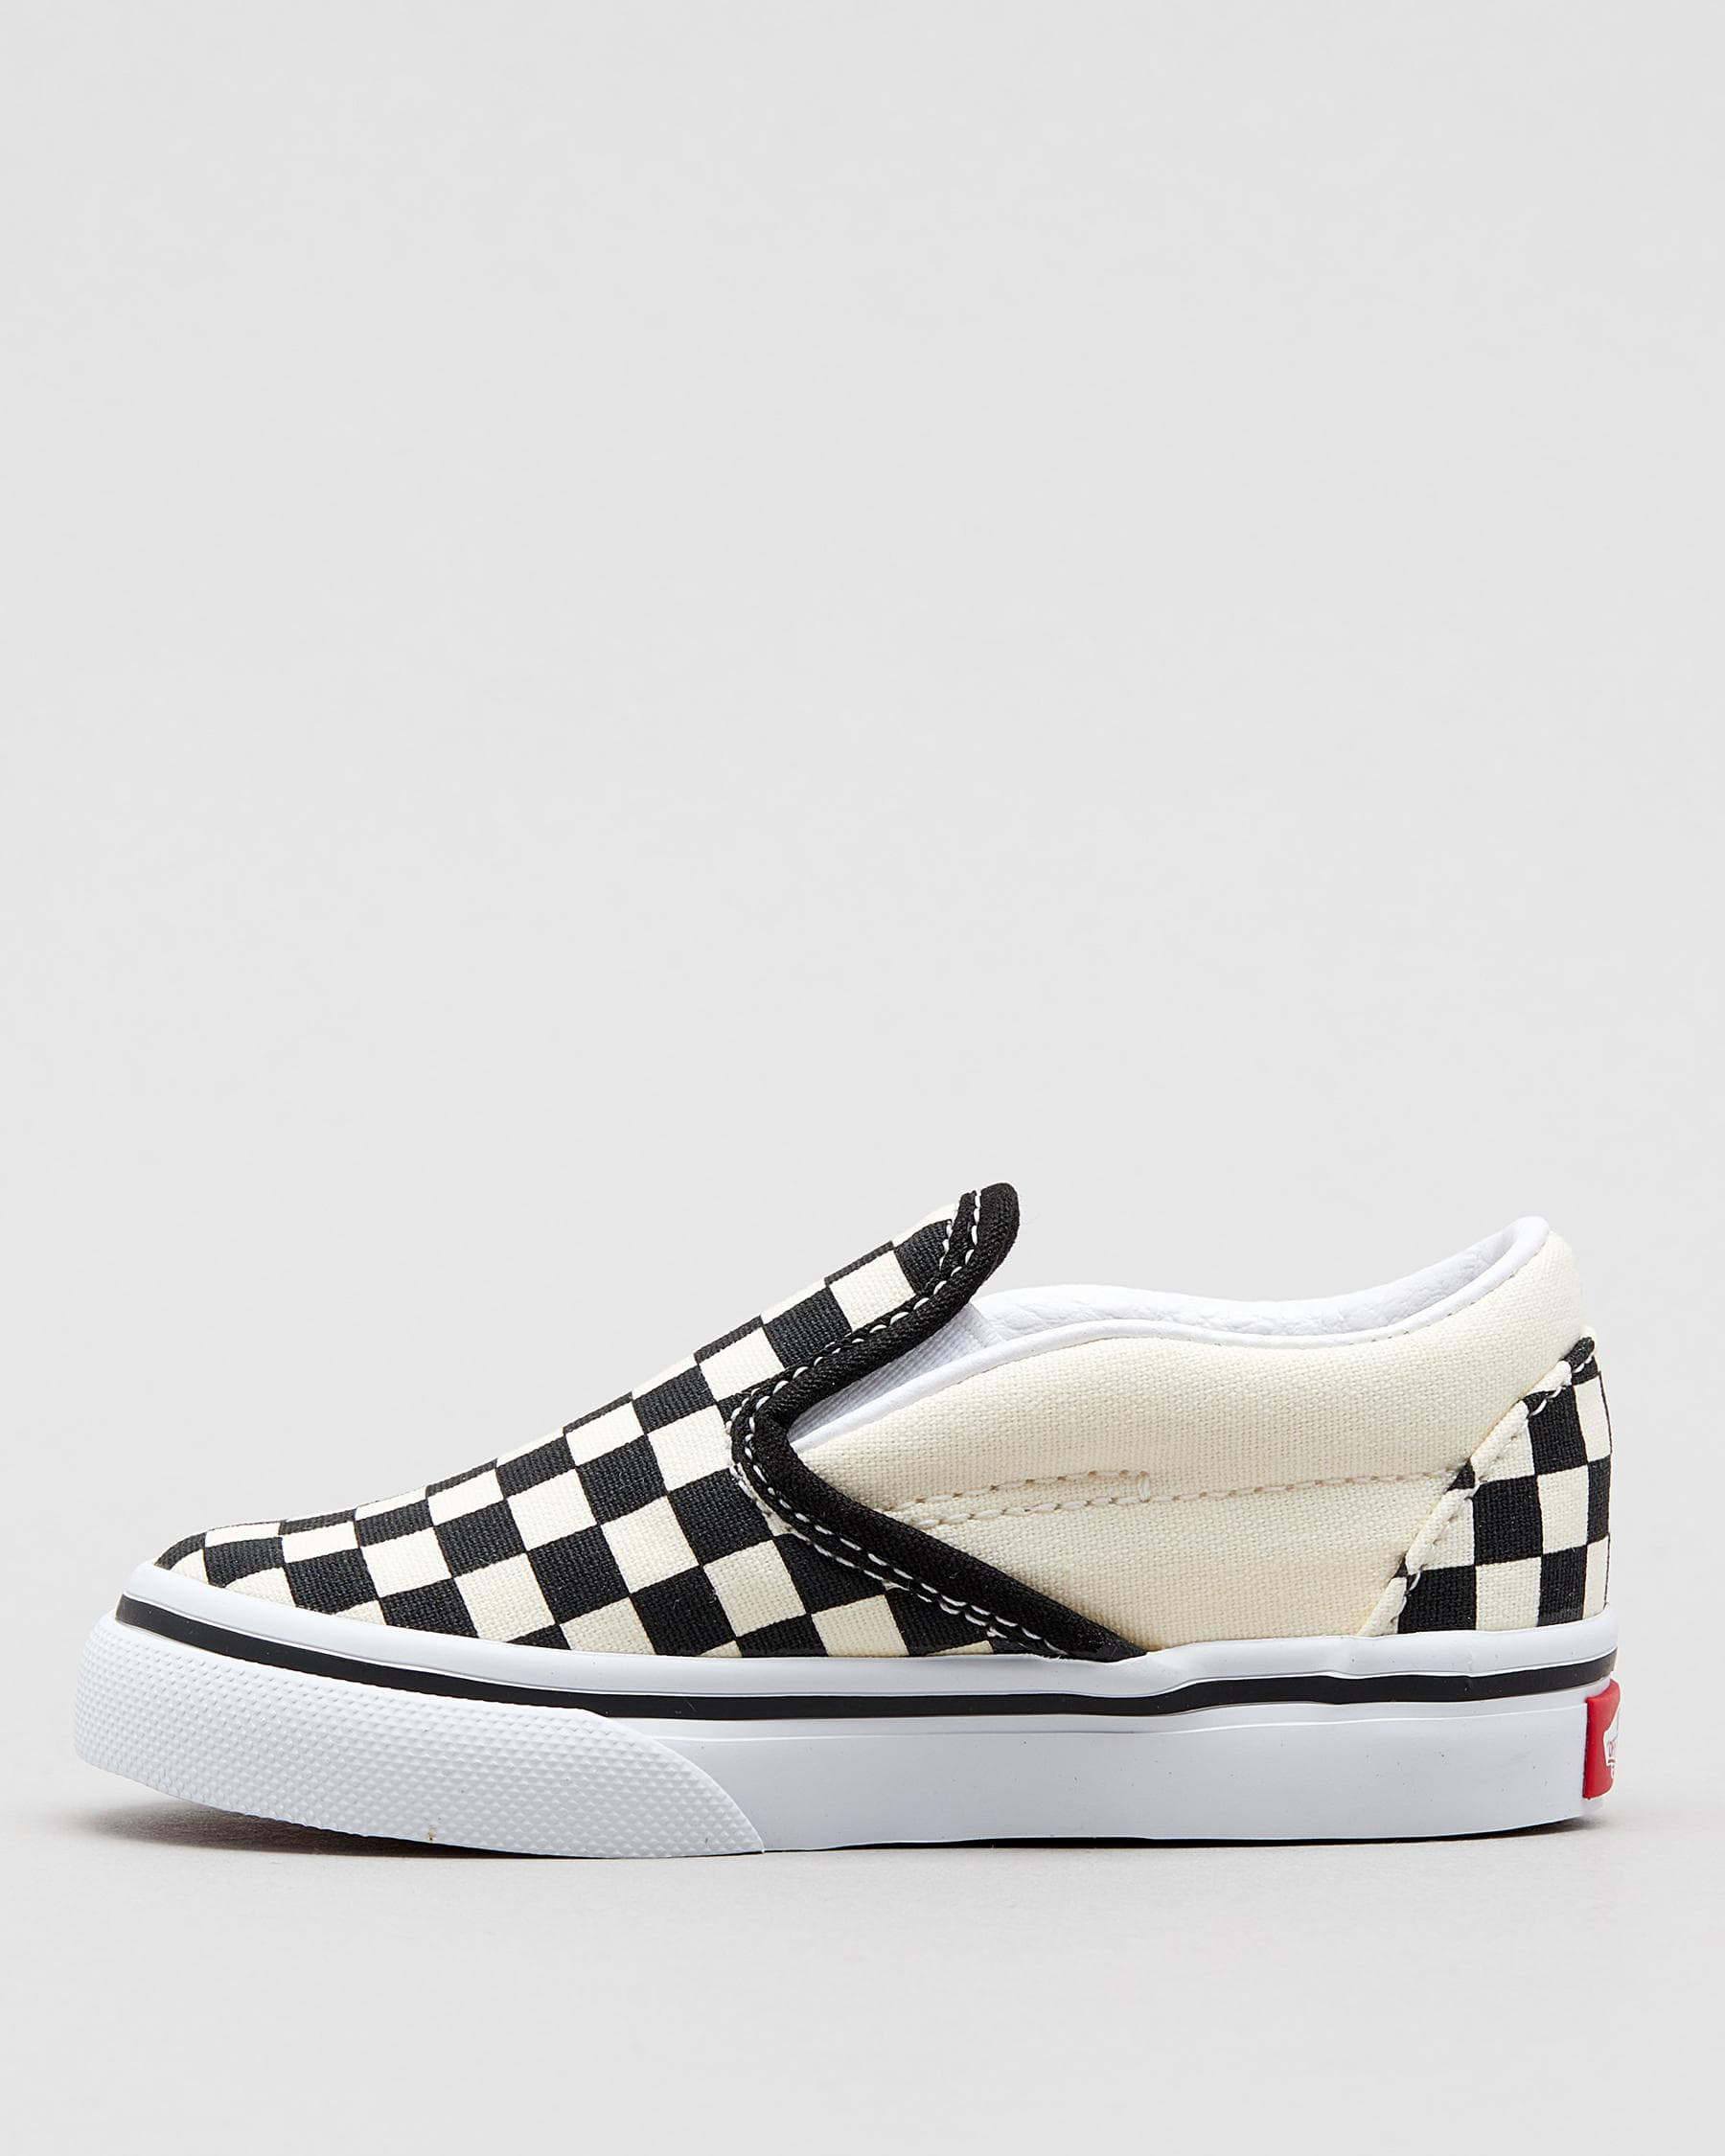 Vans Toddlers' Classic Slip-On Shoes In Black And White Checkerbo ...